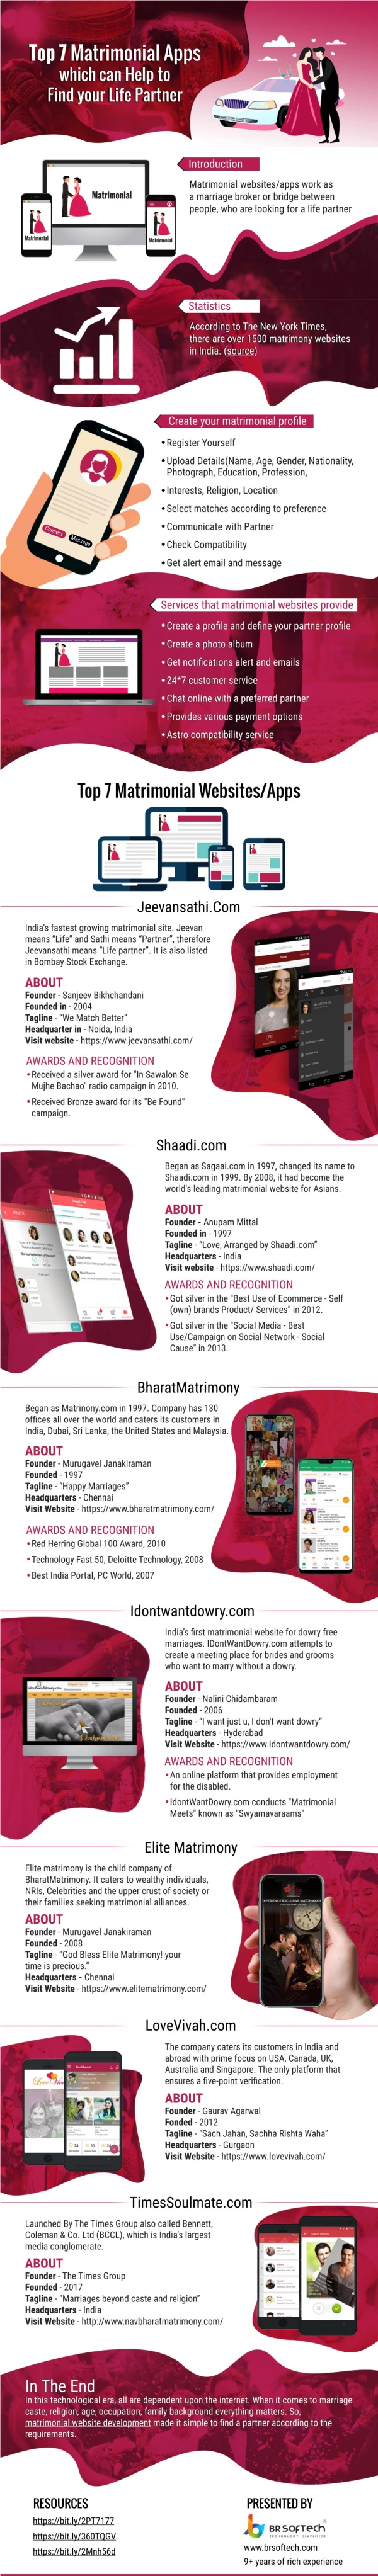 Top 7 Matrimonial Apps Which Can Help to Find Your Life Partner